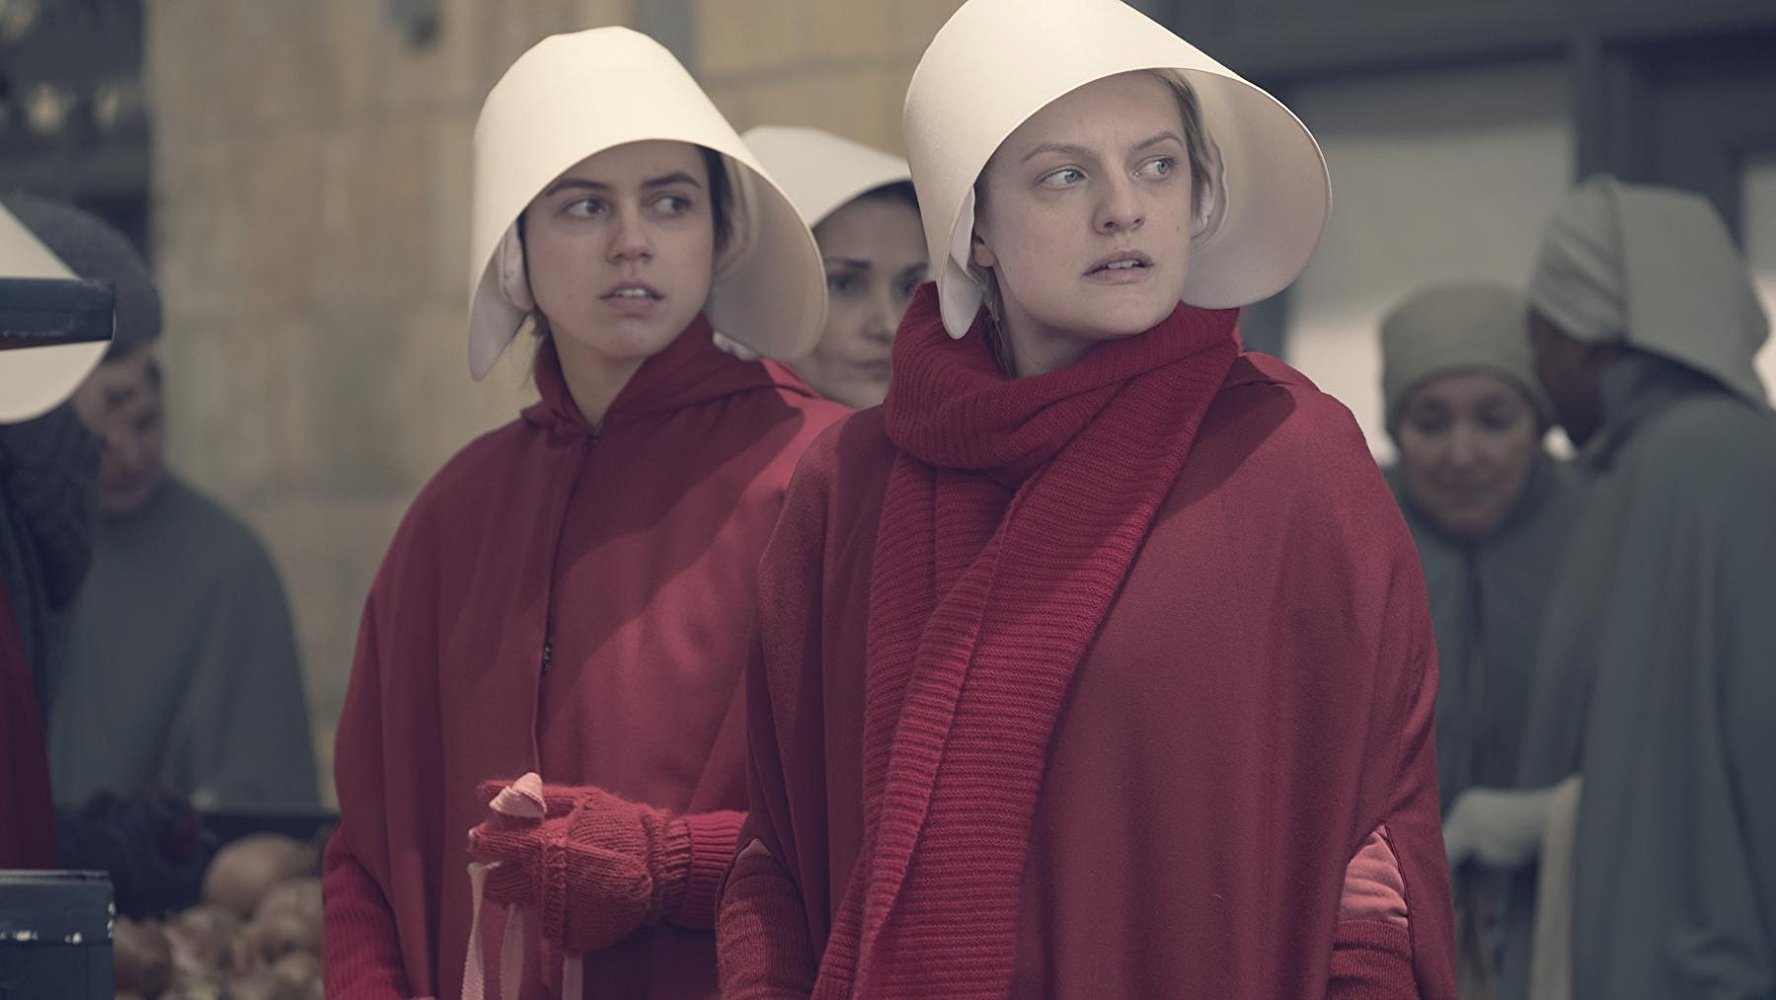 Watch the First Trailer For "The Handmaid's Tale" Season 3